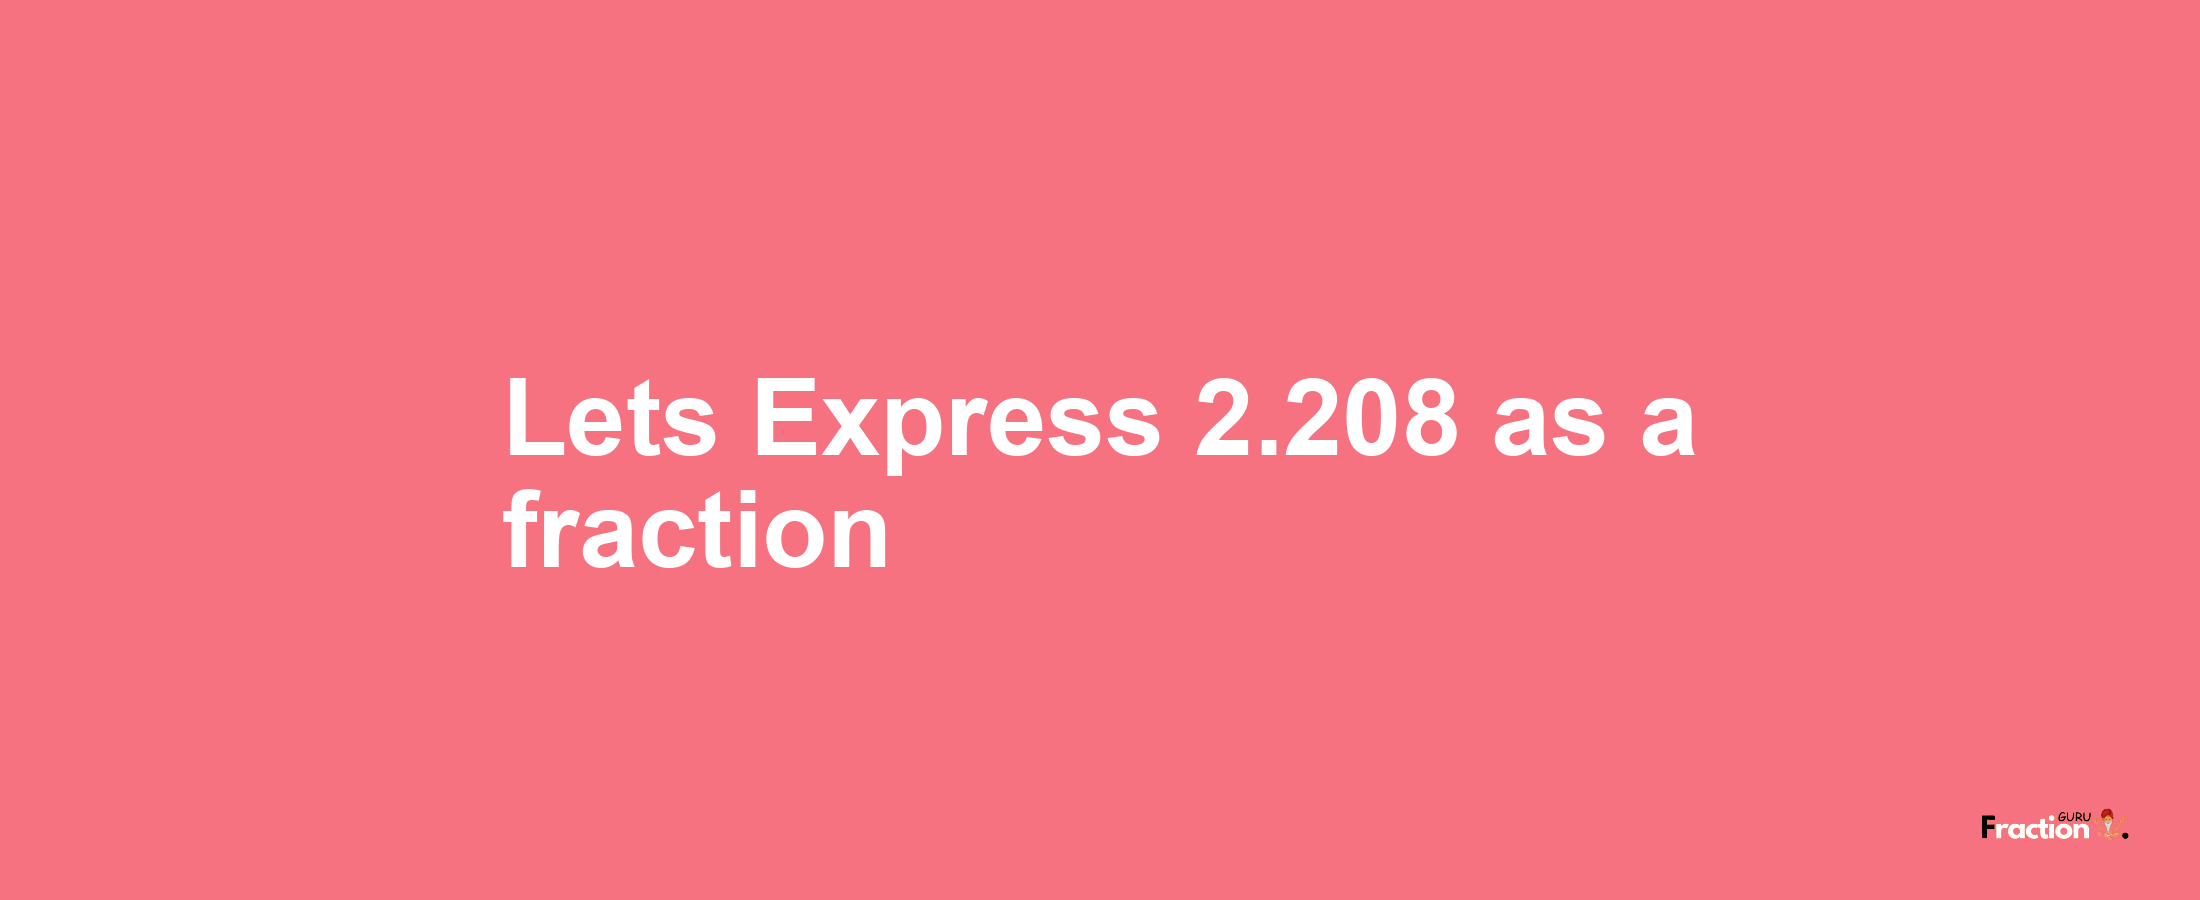 Lets Express 2.208 as afraction